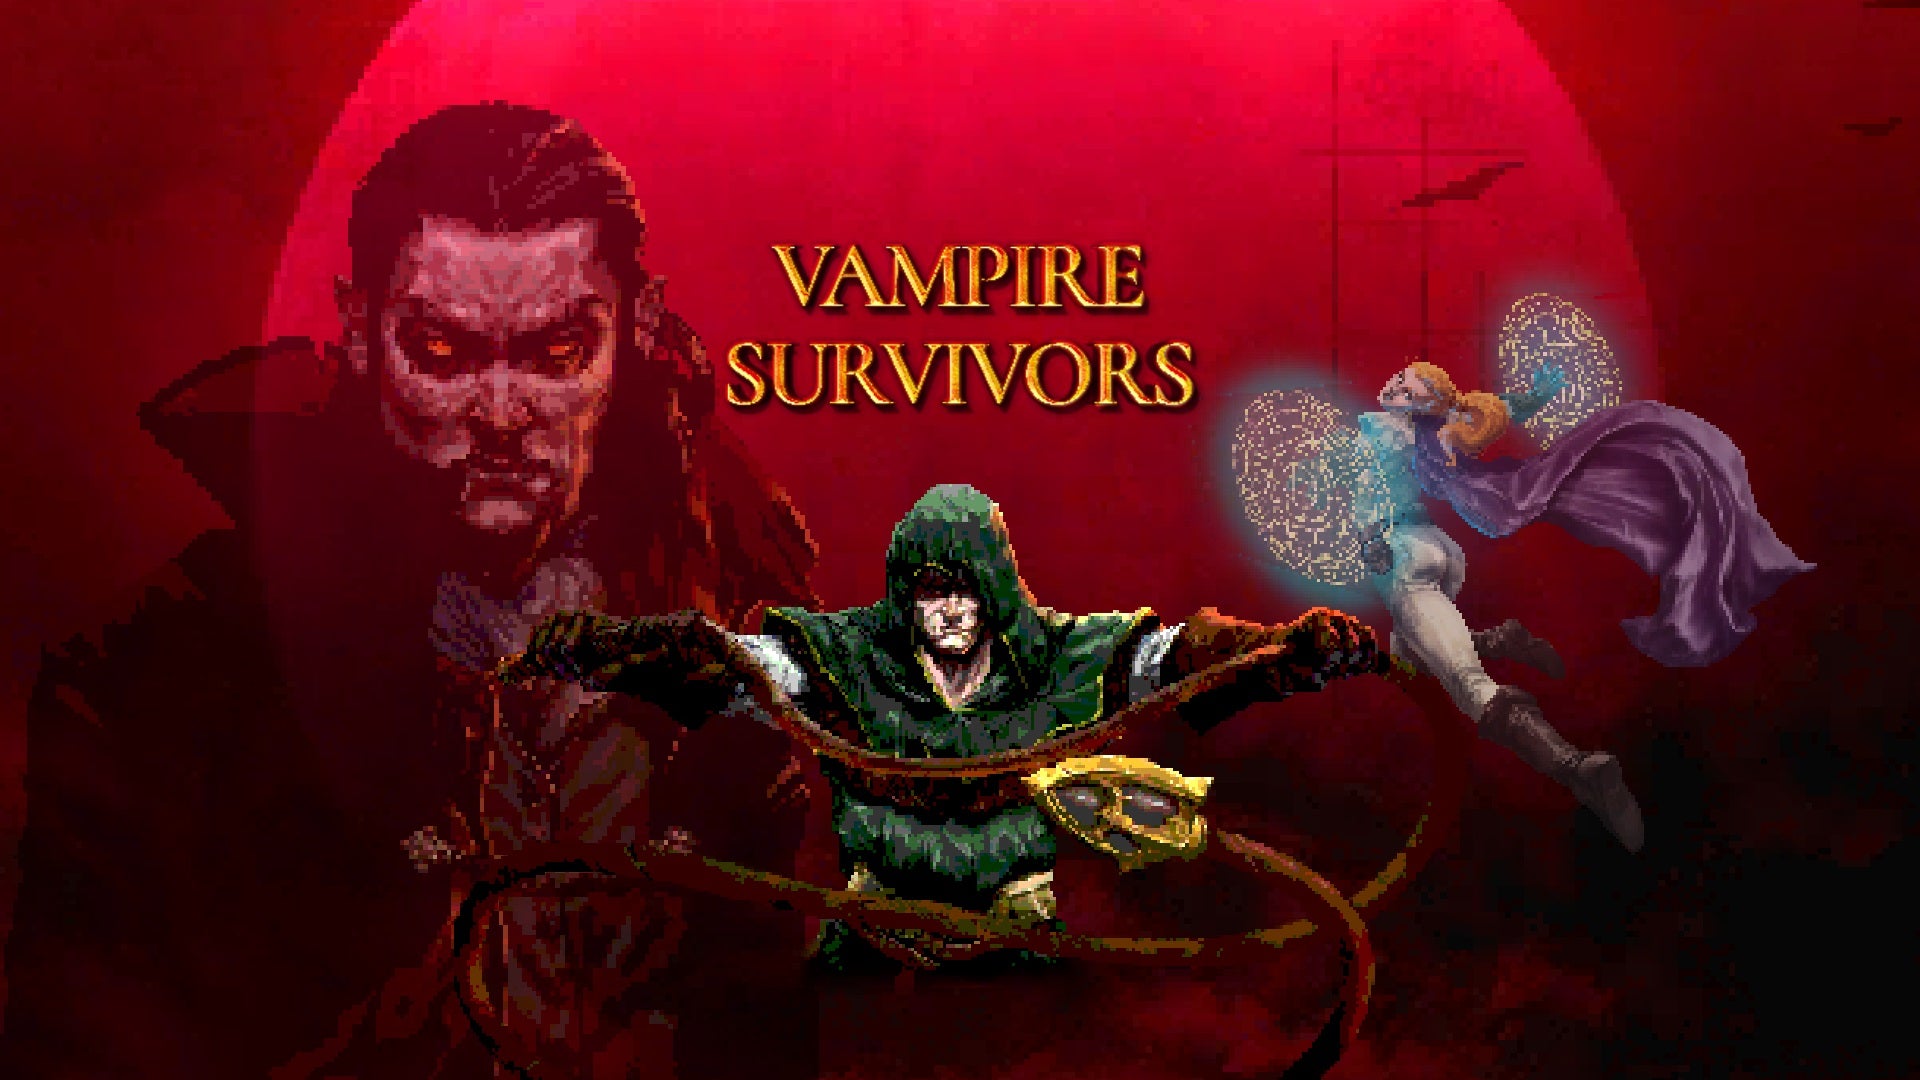 Vampire Survivors title screen with a man holding a whip underneath the name of the game. A semi-transparent vampire head is in the background along with a sorceress casting a spell